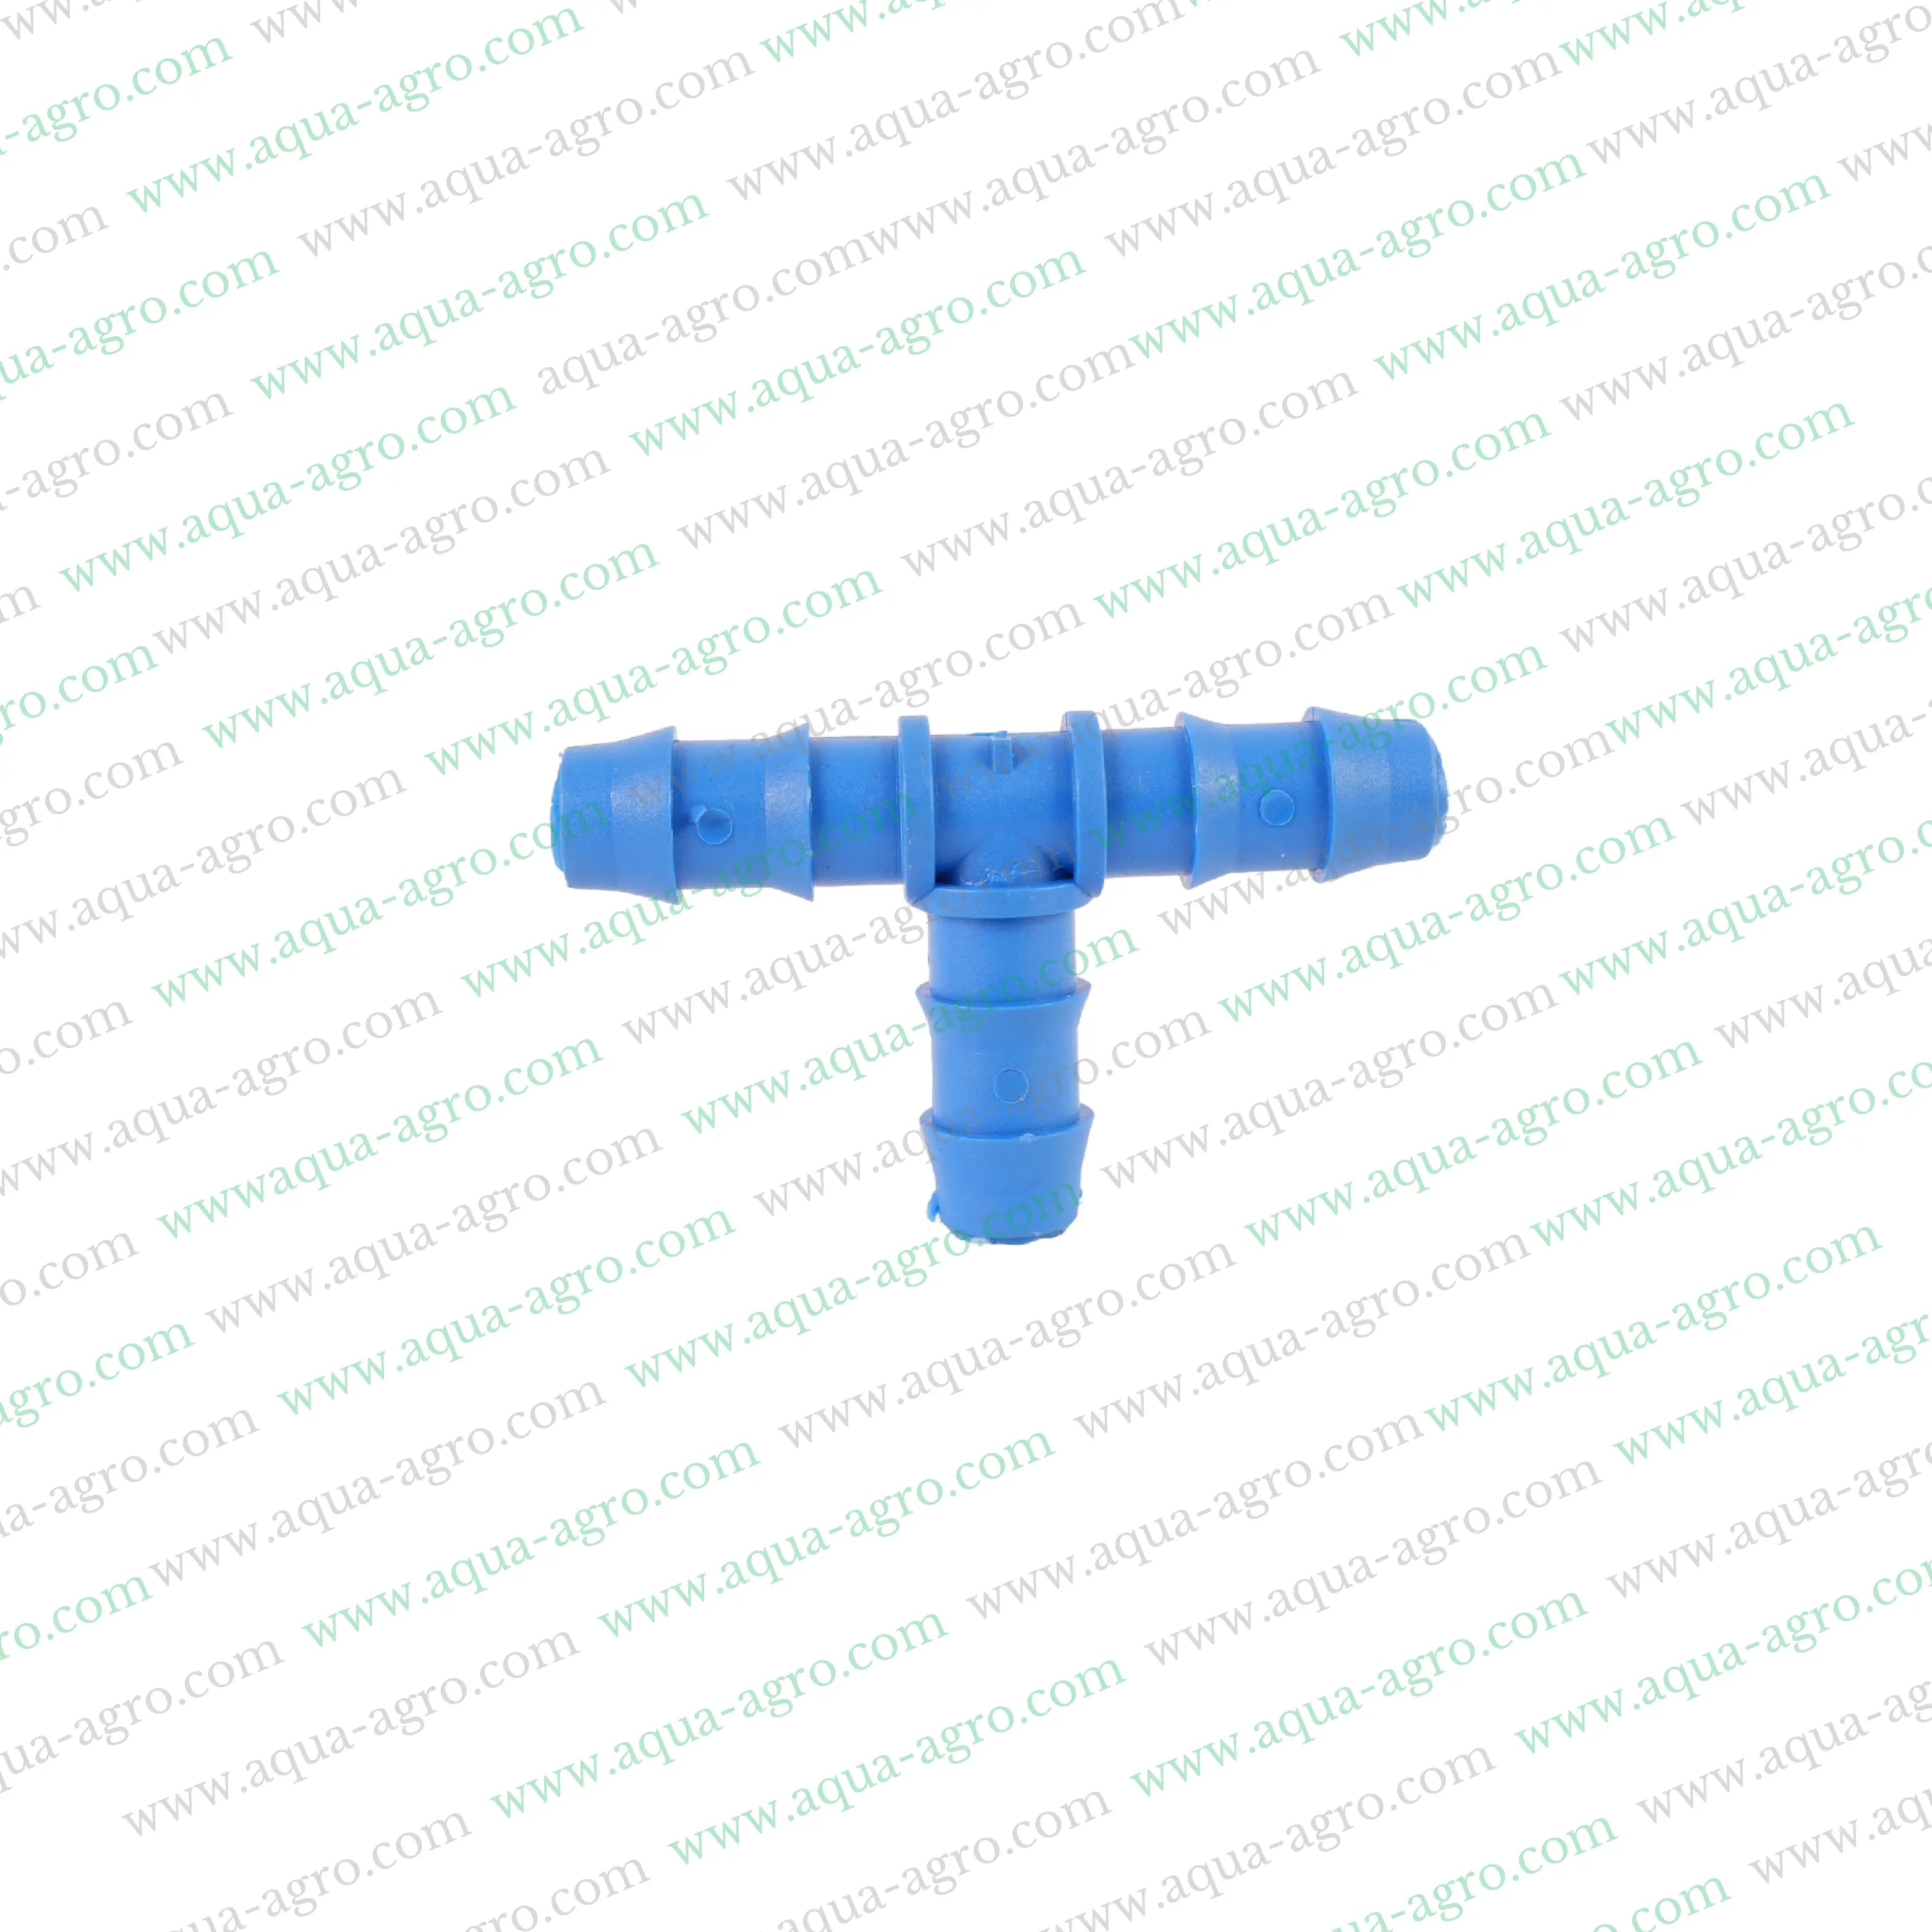 AQUA - AGRO | Drip Fittings And Accessories - Barbed Fittings - Lite - Tee - 16mm